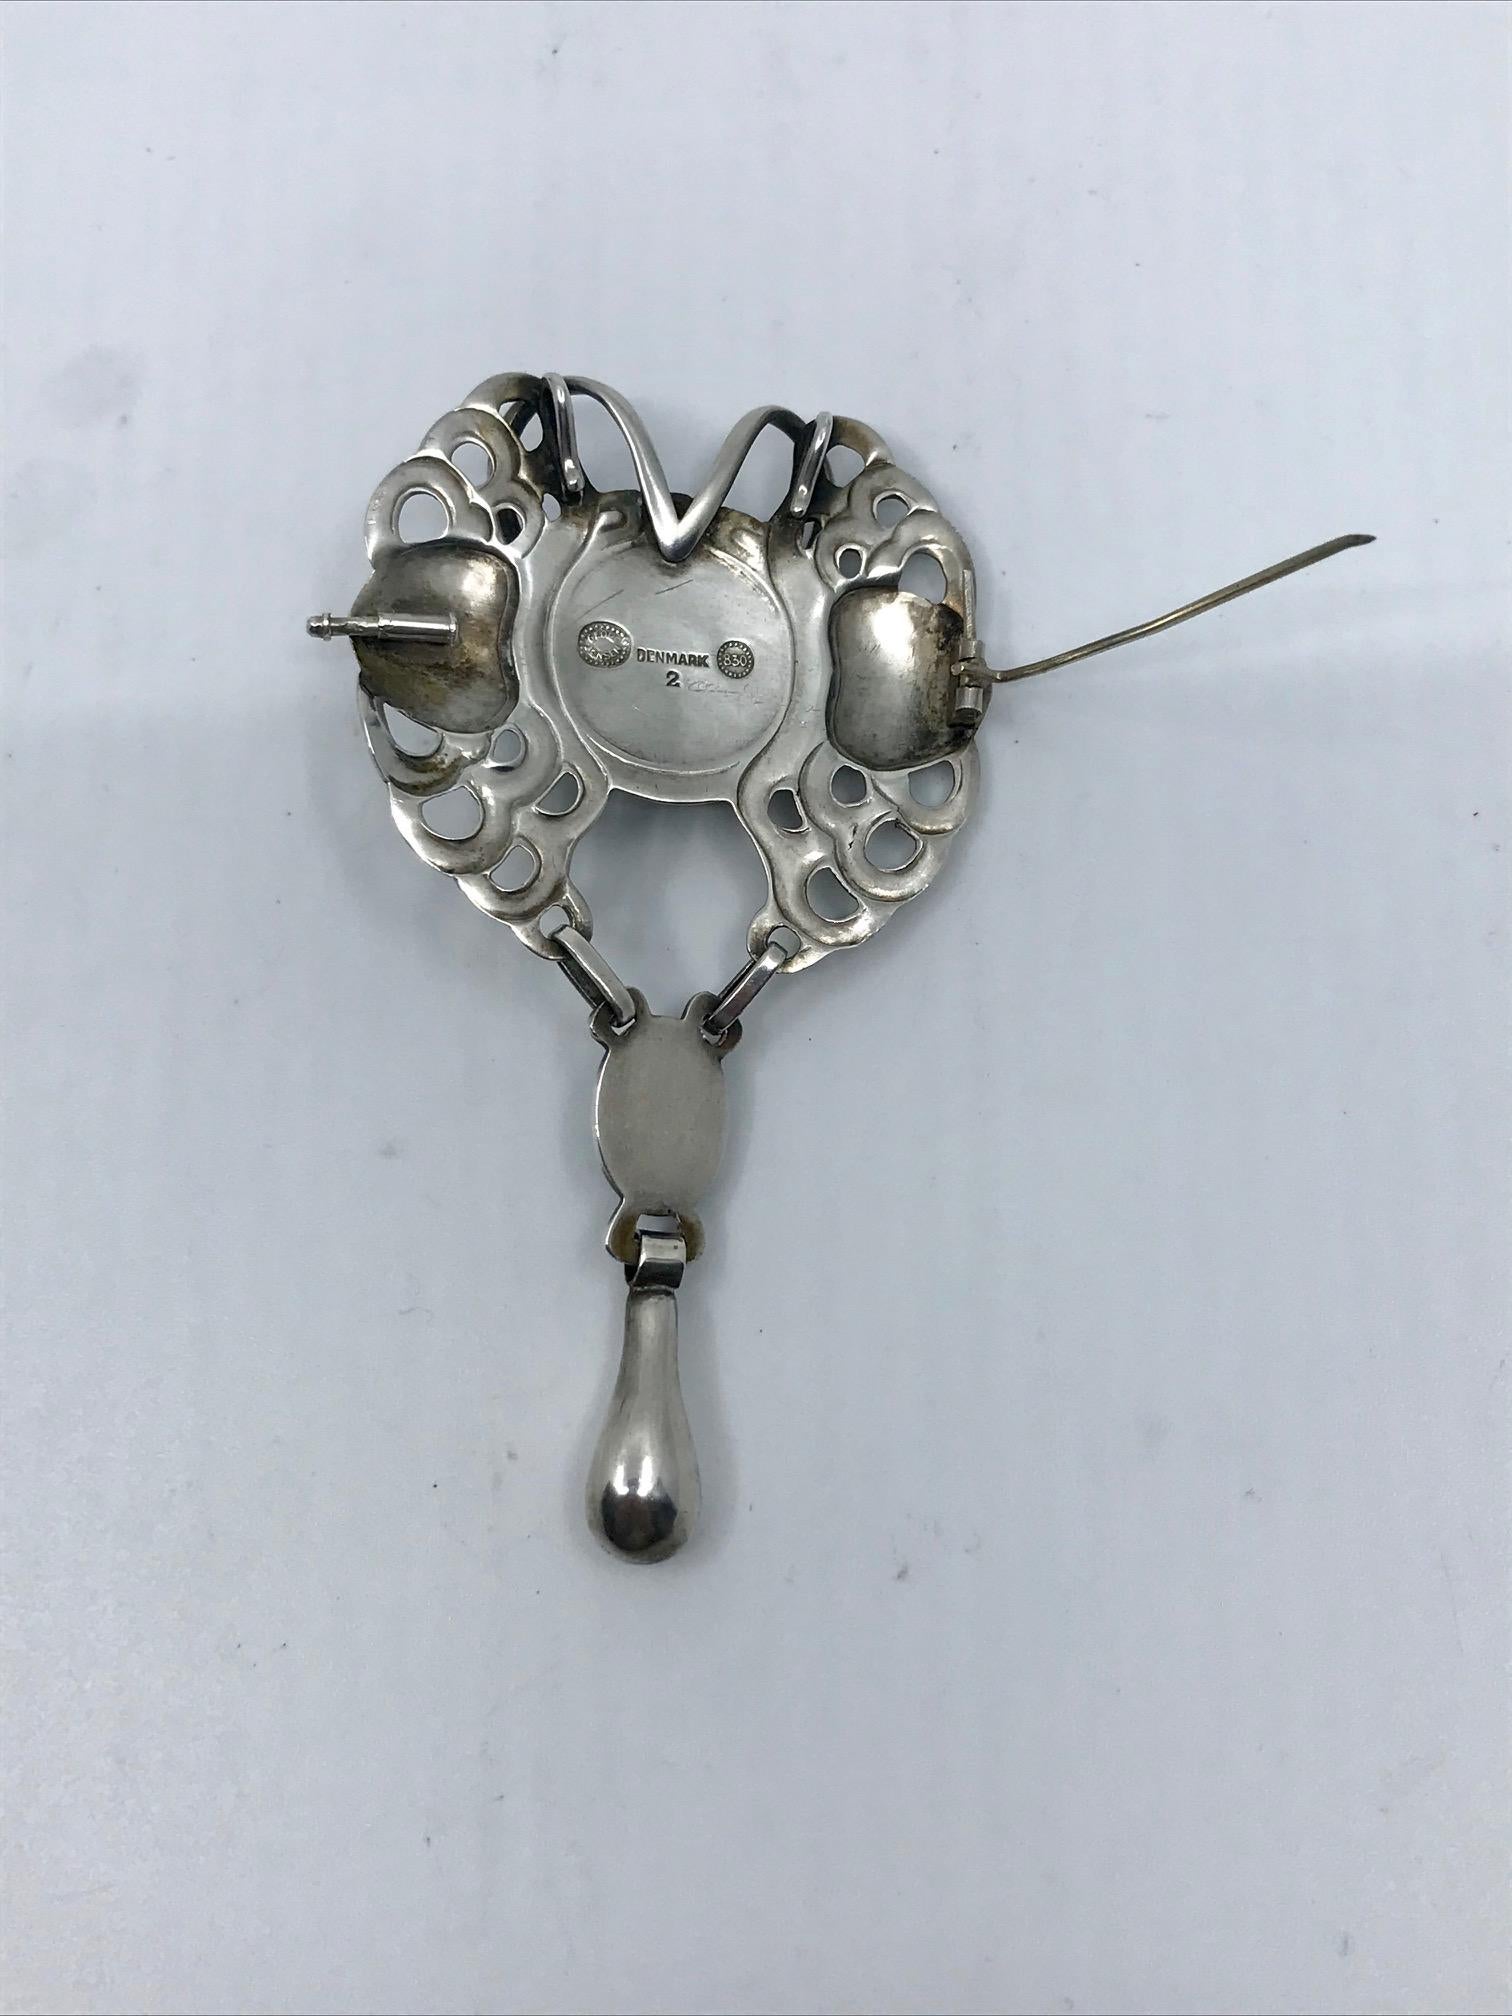 Vintage silver Georg Jensen brooch with a large round and a smaller oval cabochon set labradorite and a silver drop, design #2 by Georg Jensen.
Measures 3 5/8″ x 2″ (9.2cm x 5.1cm). Two eyelets have been very neatly added on the back top of the